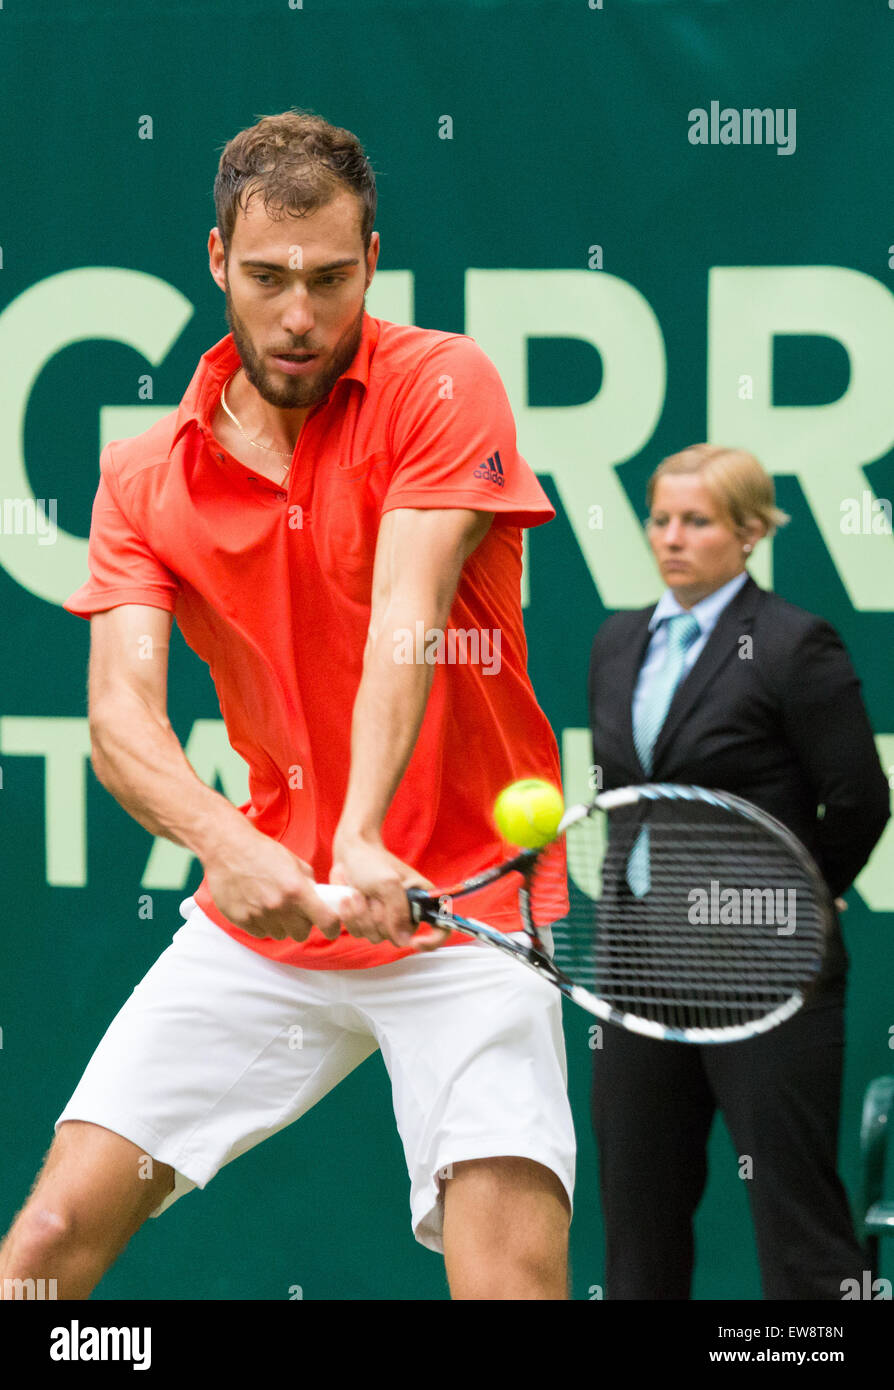 Jerzy Janowicz (POL) plays a shot in the quarter finals of the ATP Gerry Weber Open Tennis Championships at Halle, Germany. Stock Photo